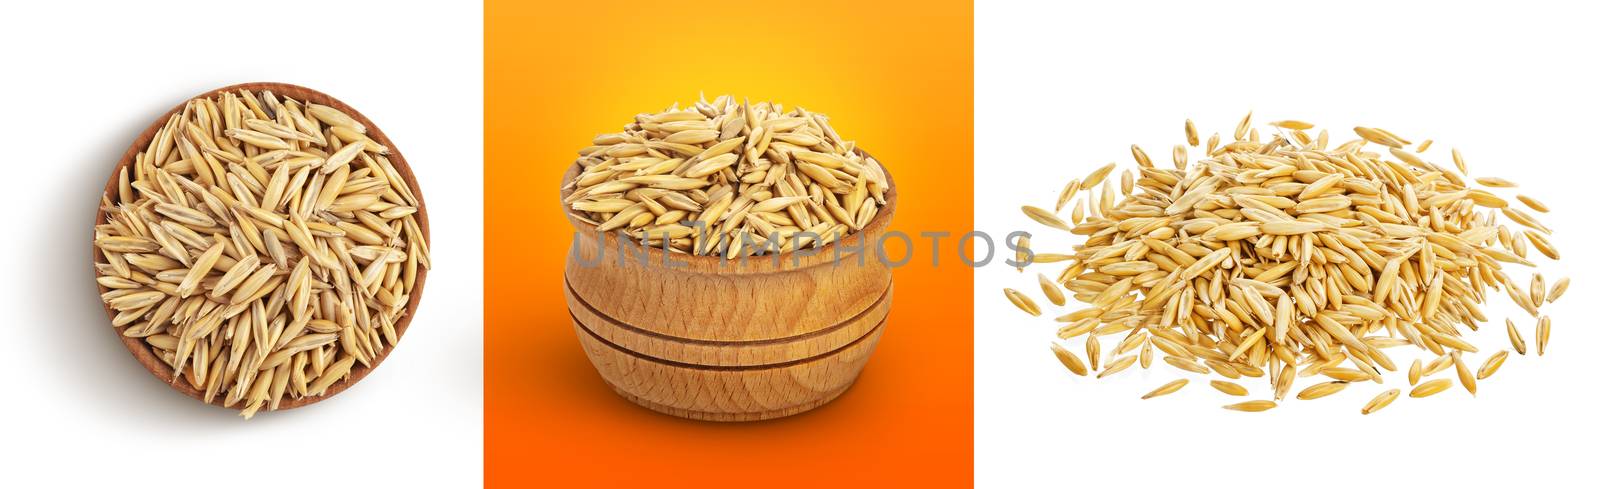 Oat seeds isolated on white background with clipping path, wheat grains by xamtiw